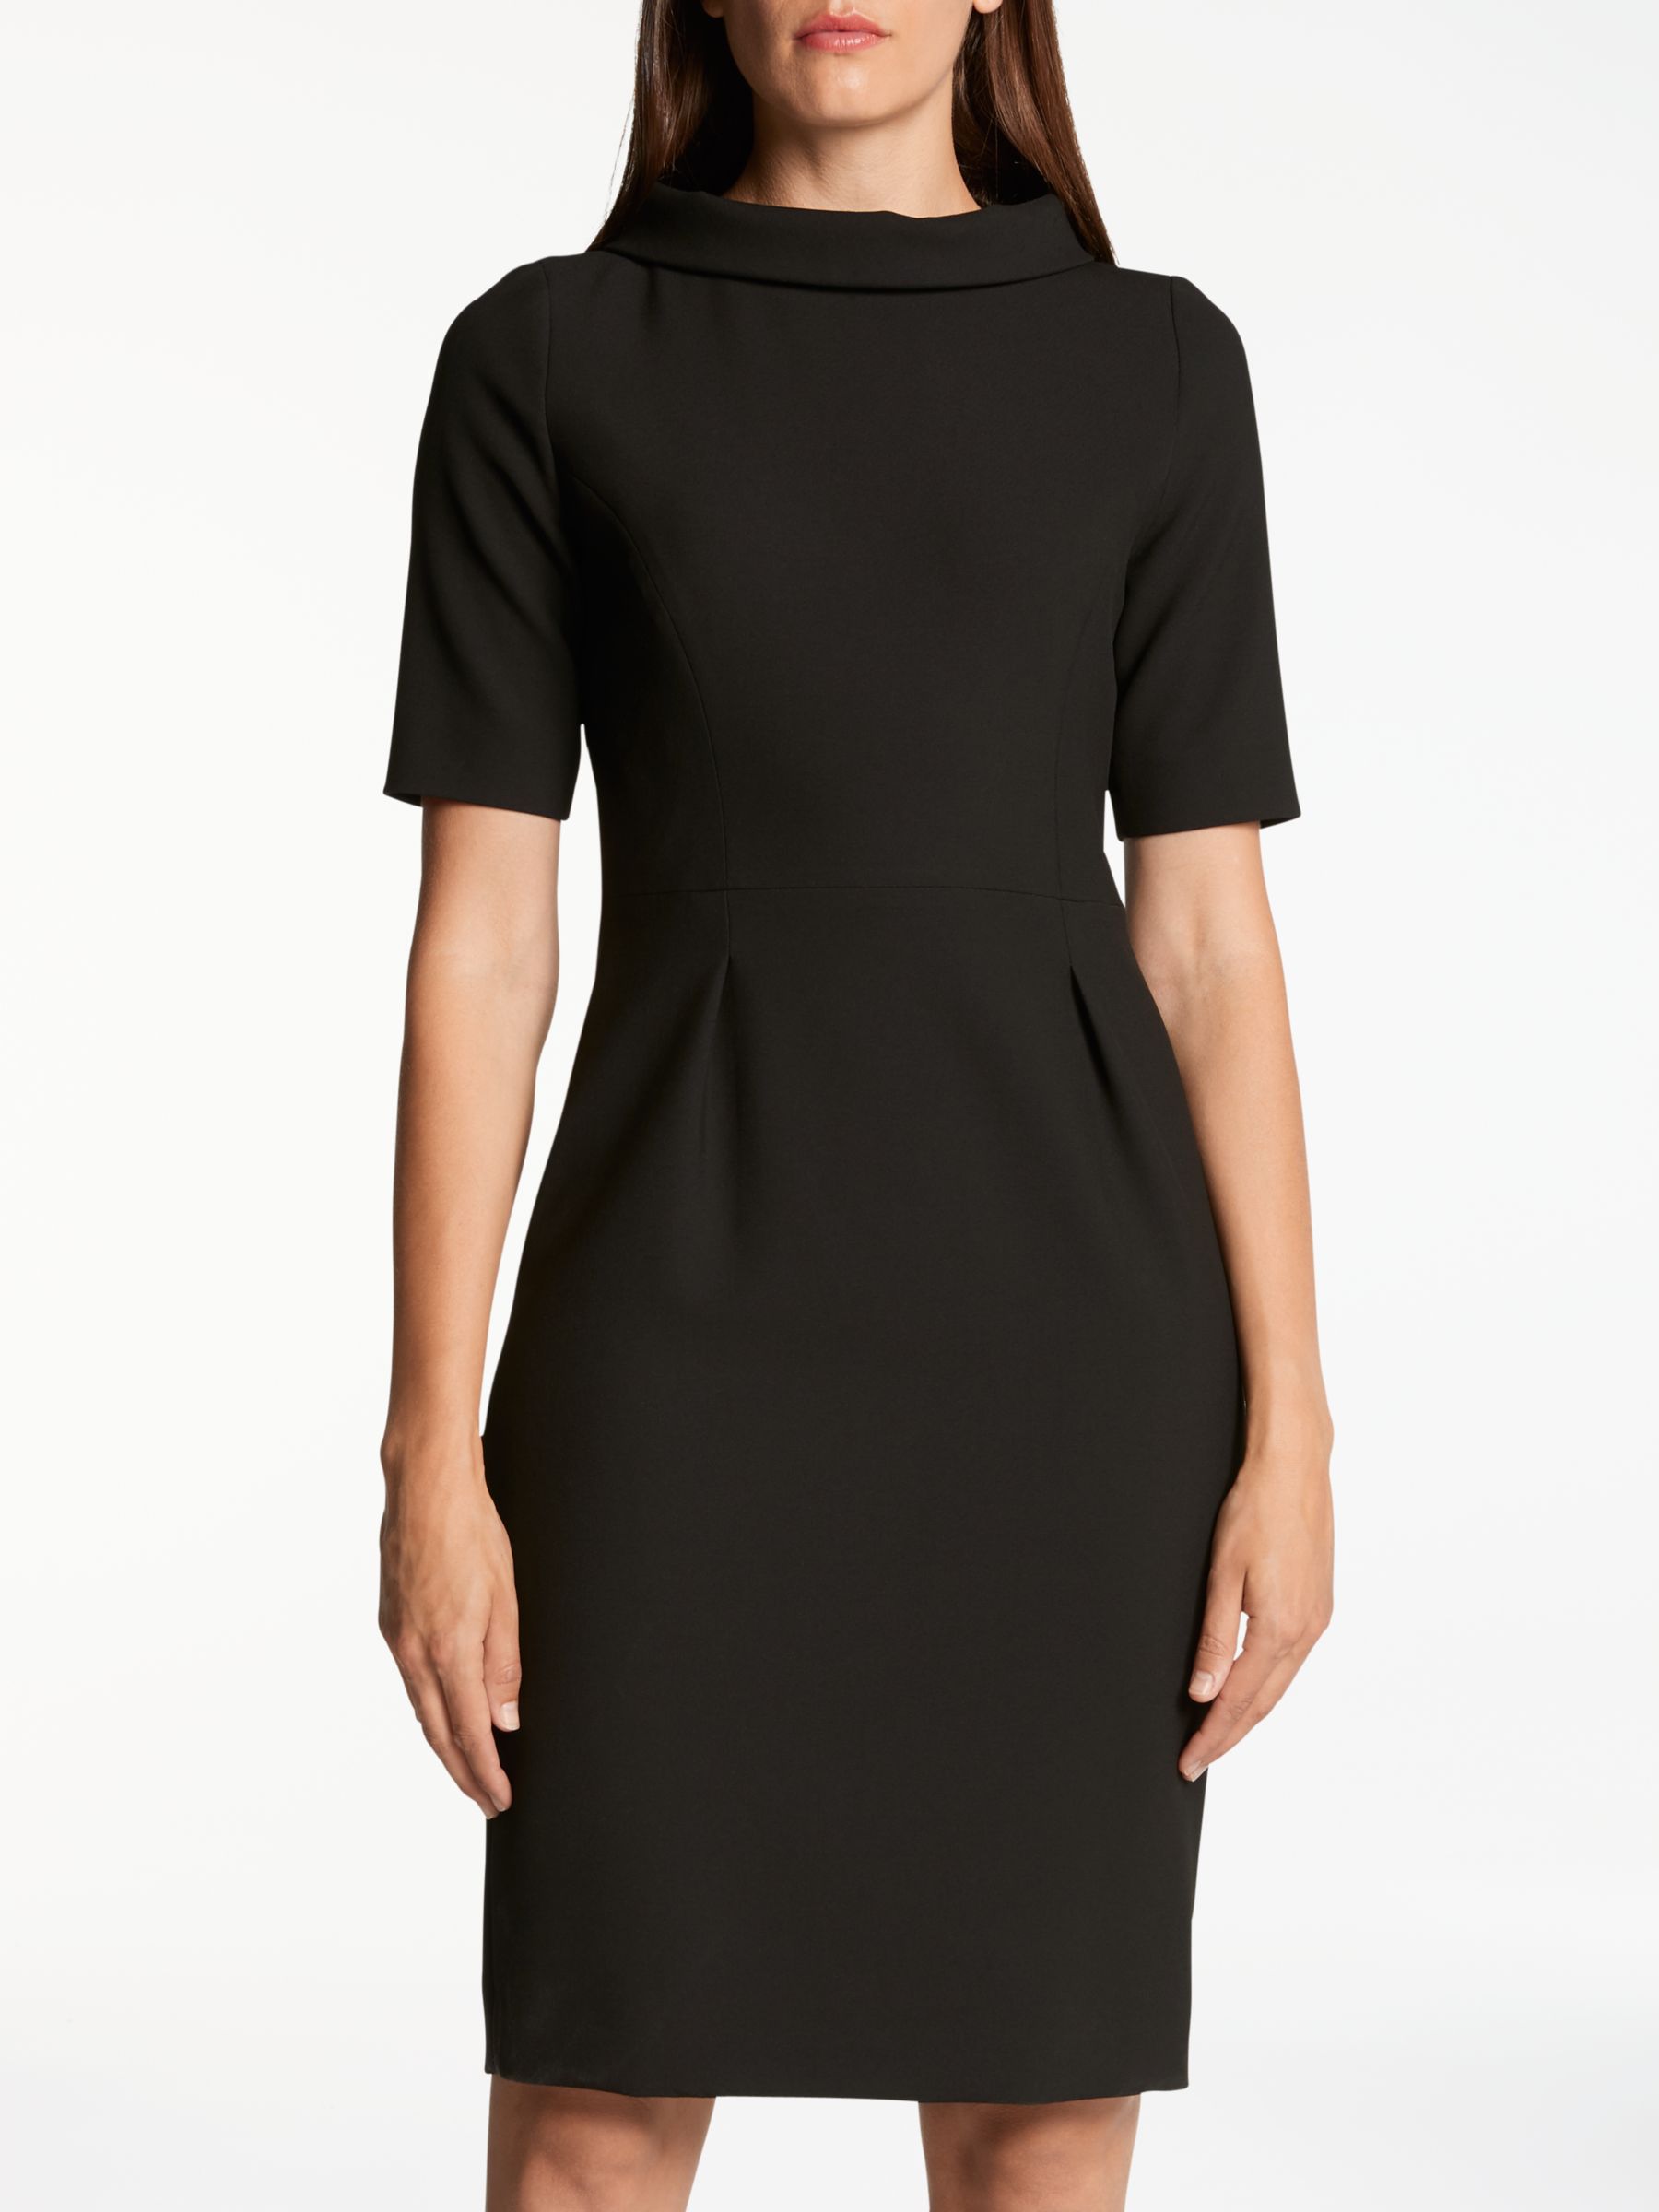 Bruce by Bruce Oldfield Picture Collar Dress, Black, 16